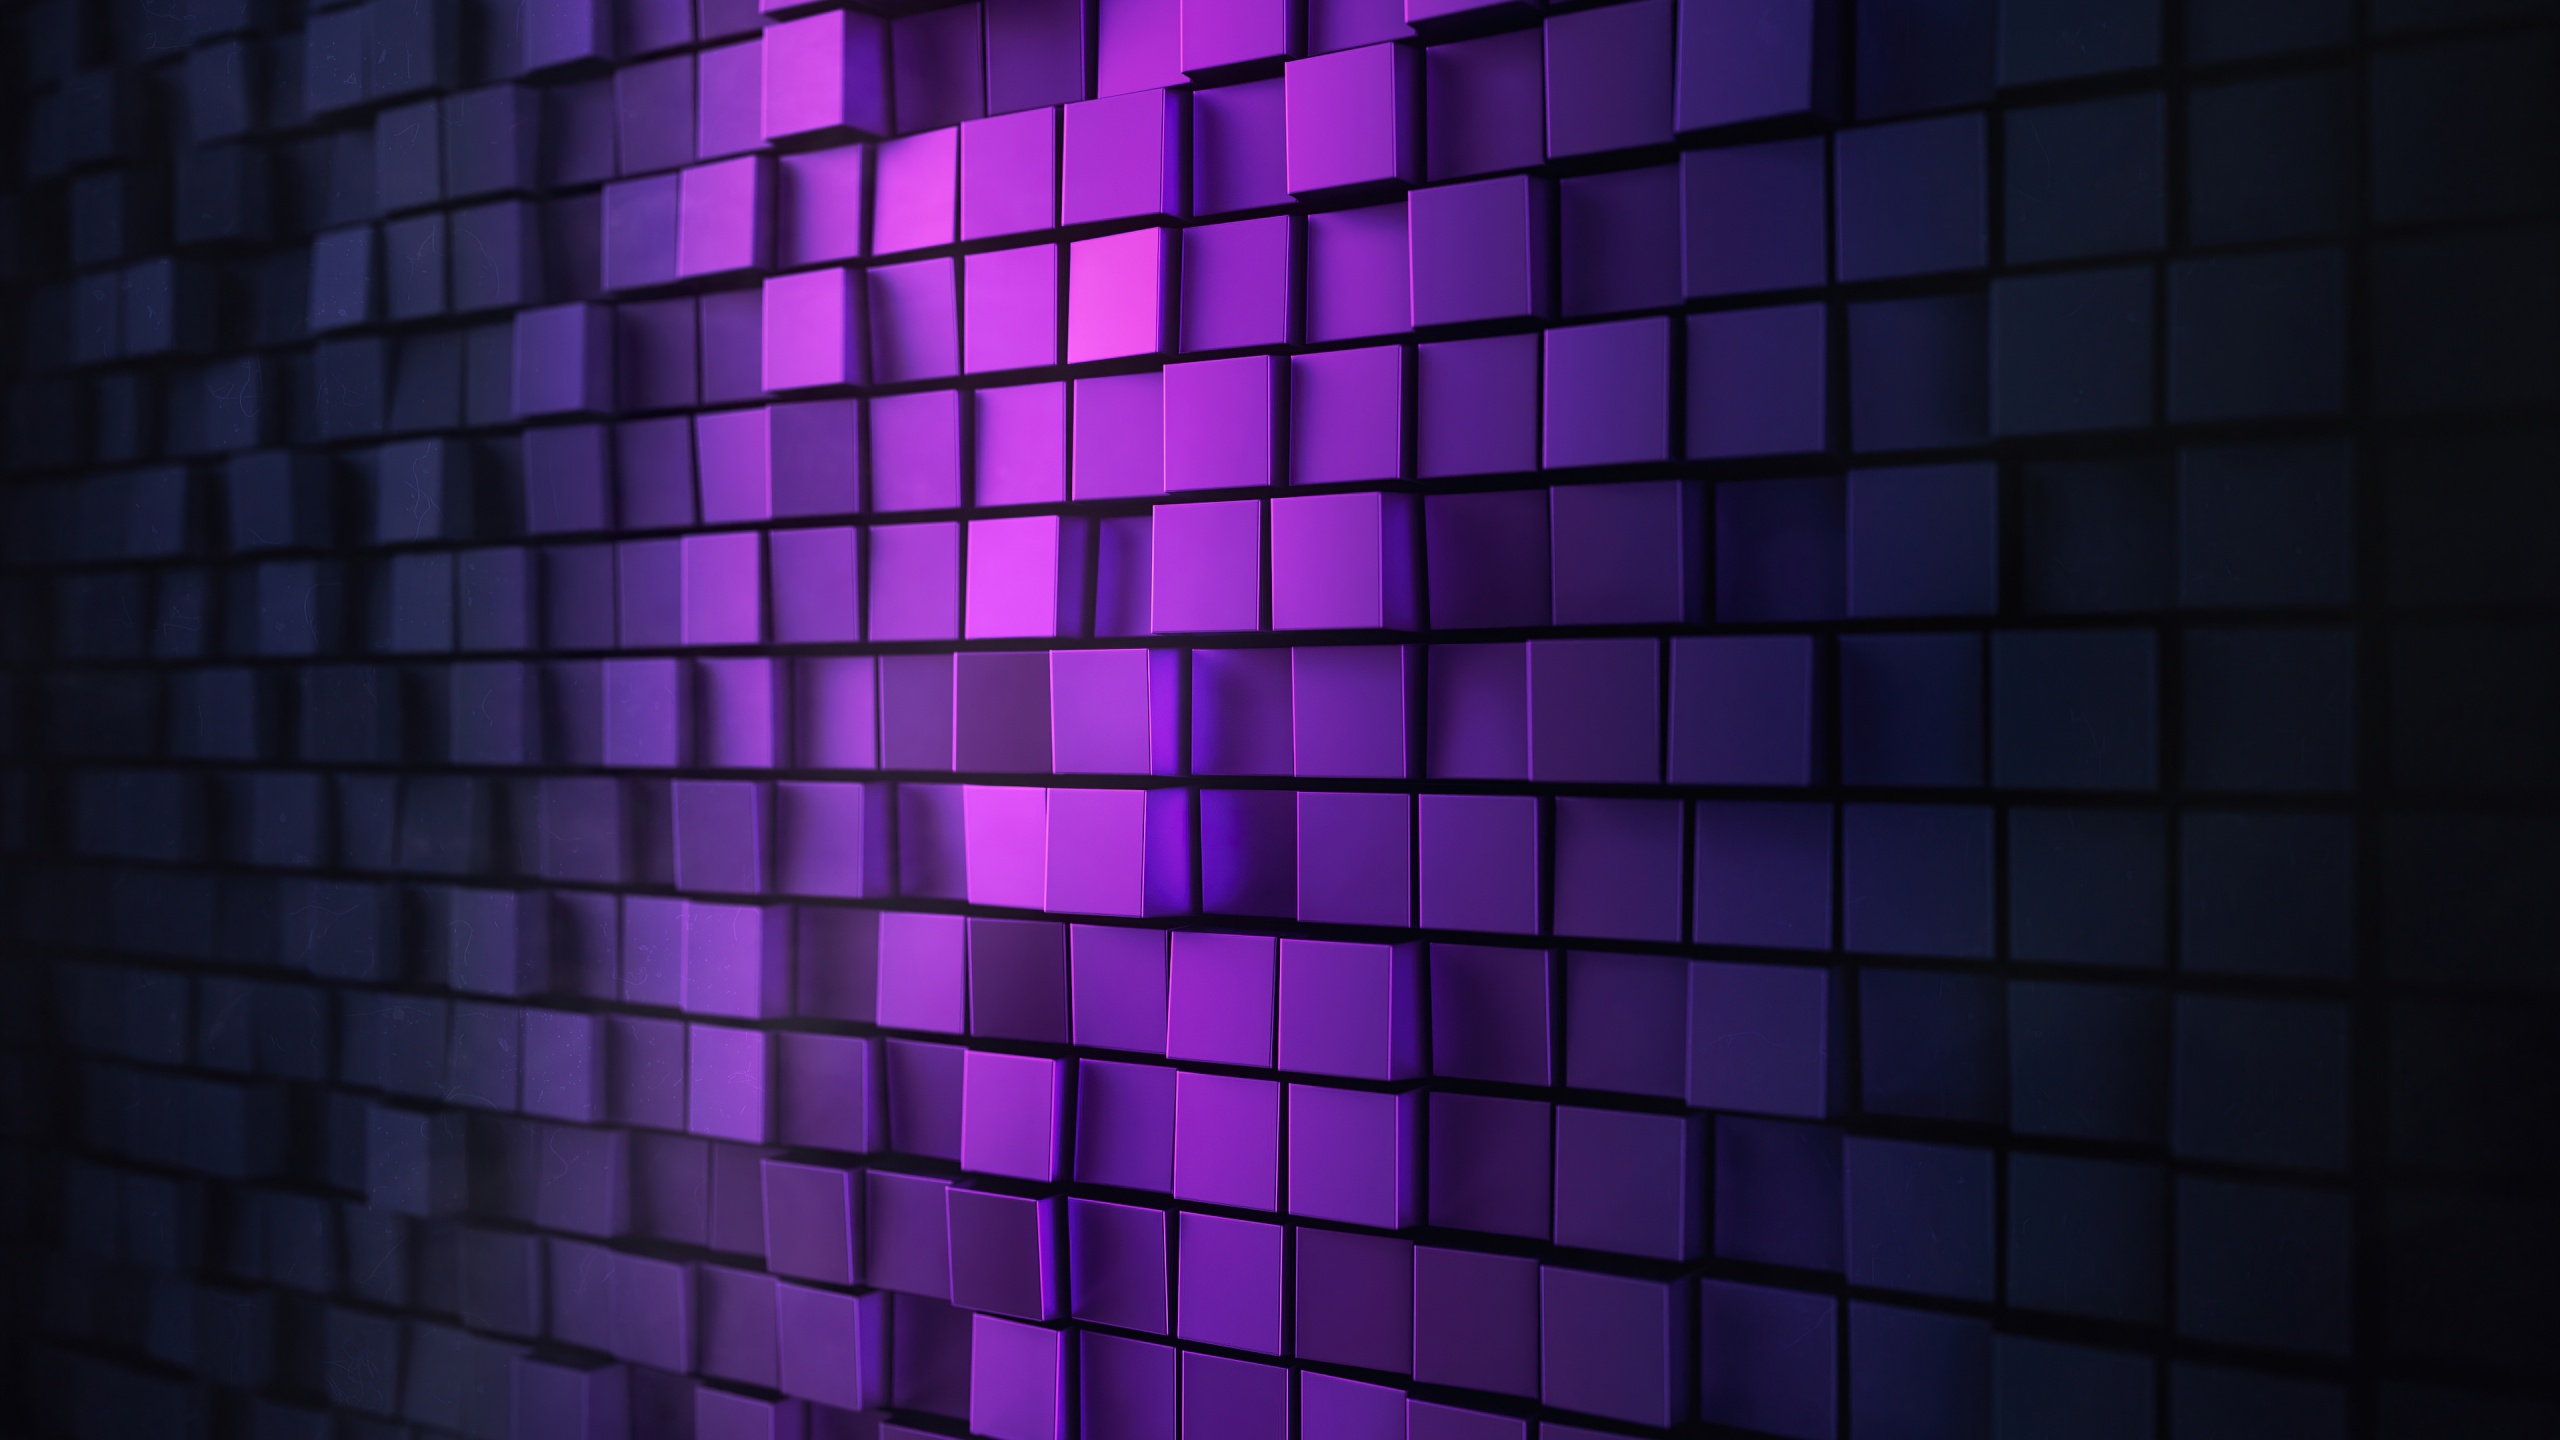 3D background 4K Wallpaper, Squares, Purple light, Metal, Abstract, #2700